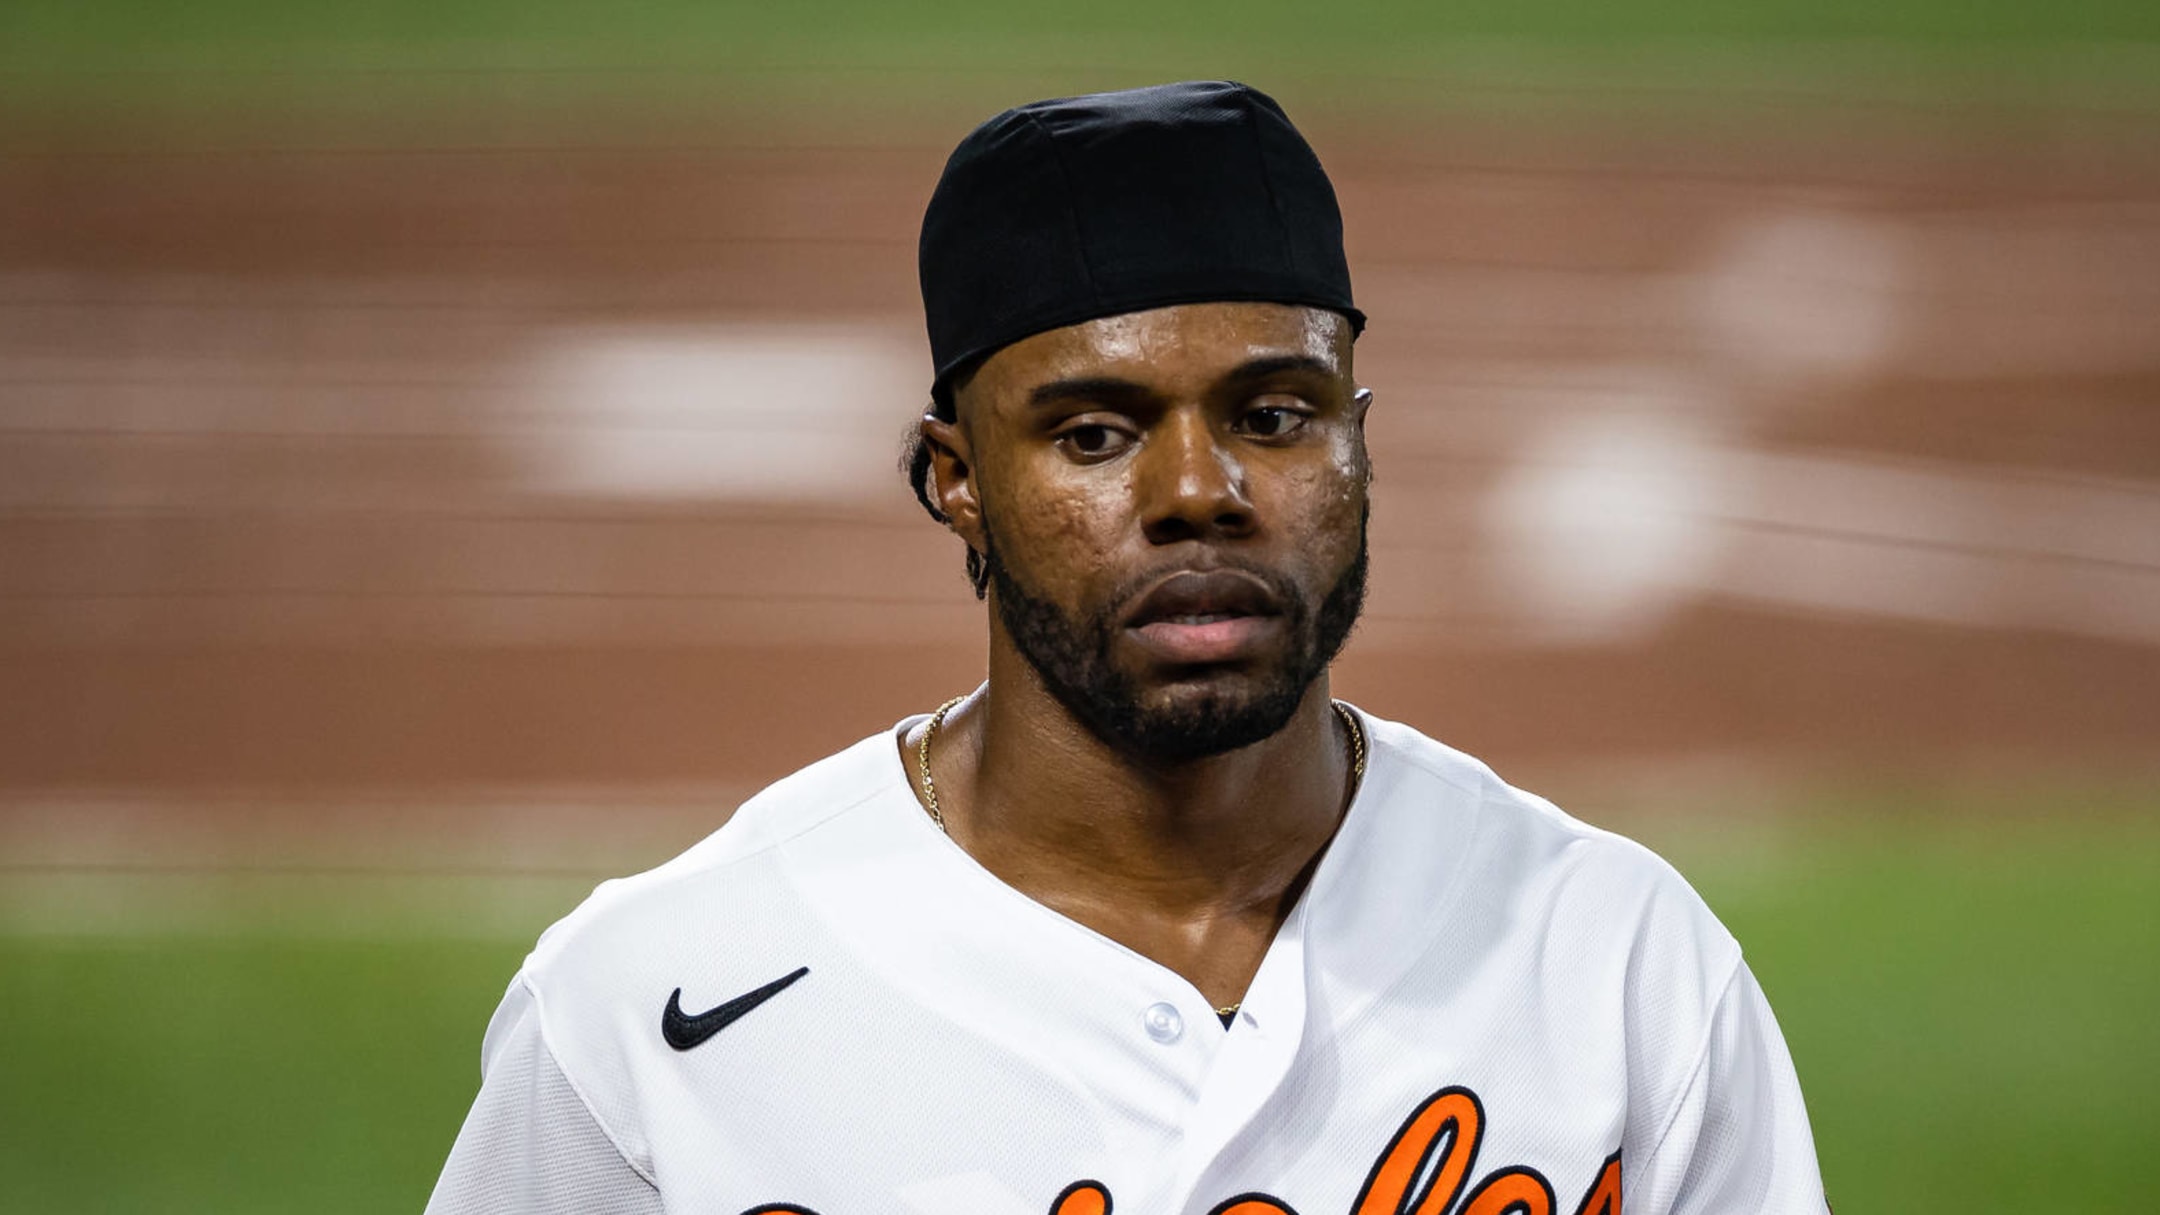 Orioles willing to listen to trade offers on Cedric Mullins